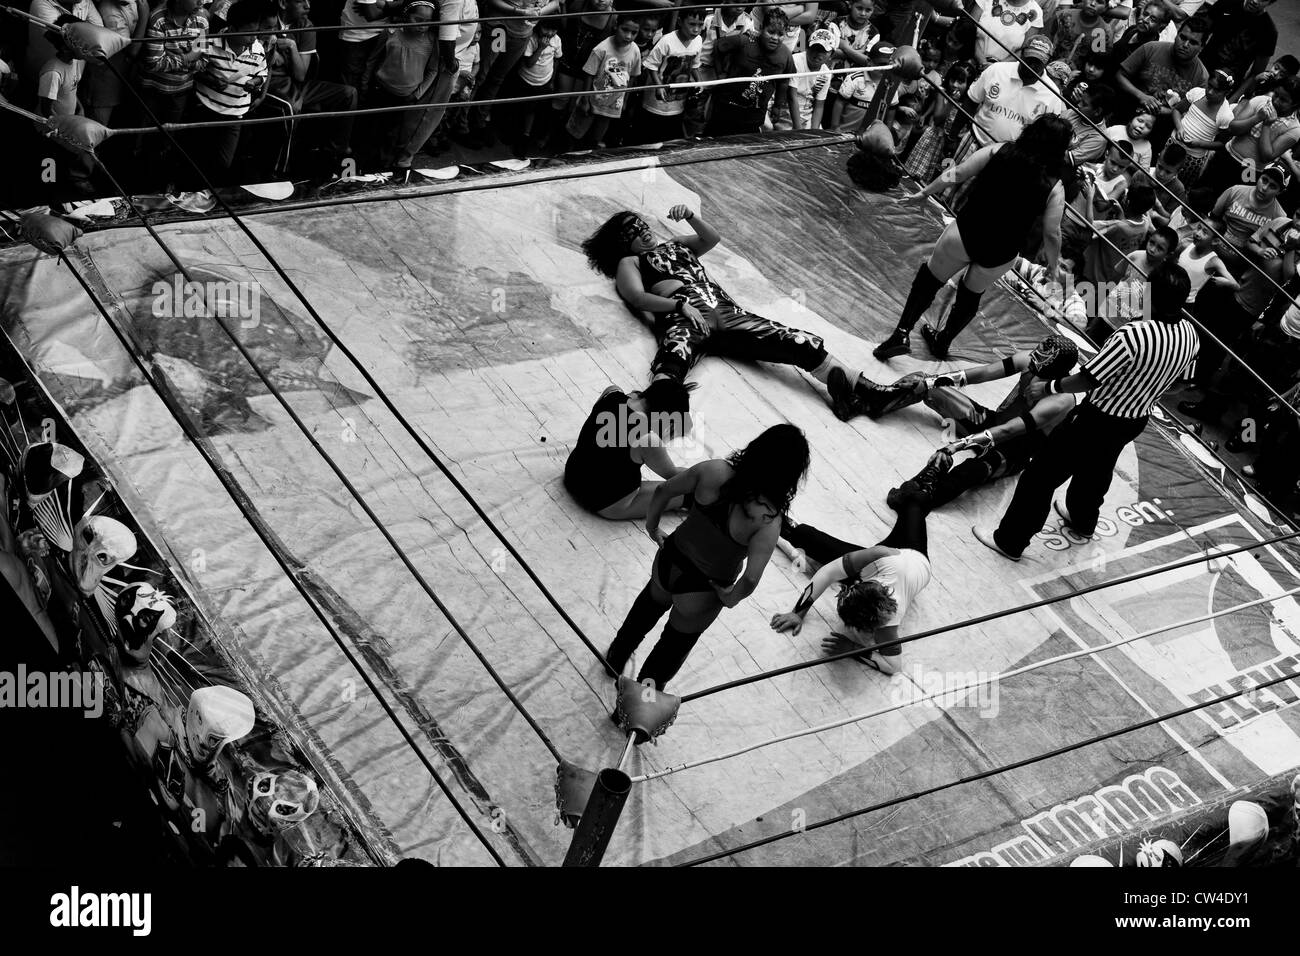 Female Lucha libre wrestlers fight during a mixed-sex performance at a local arena in Mexico City, Mexico Stock Photo